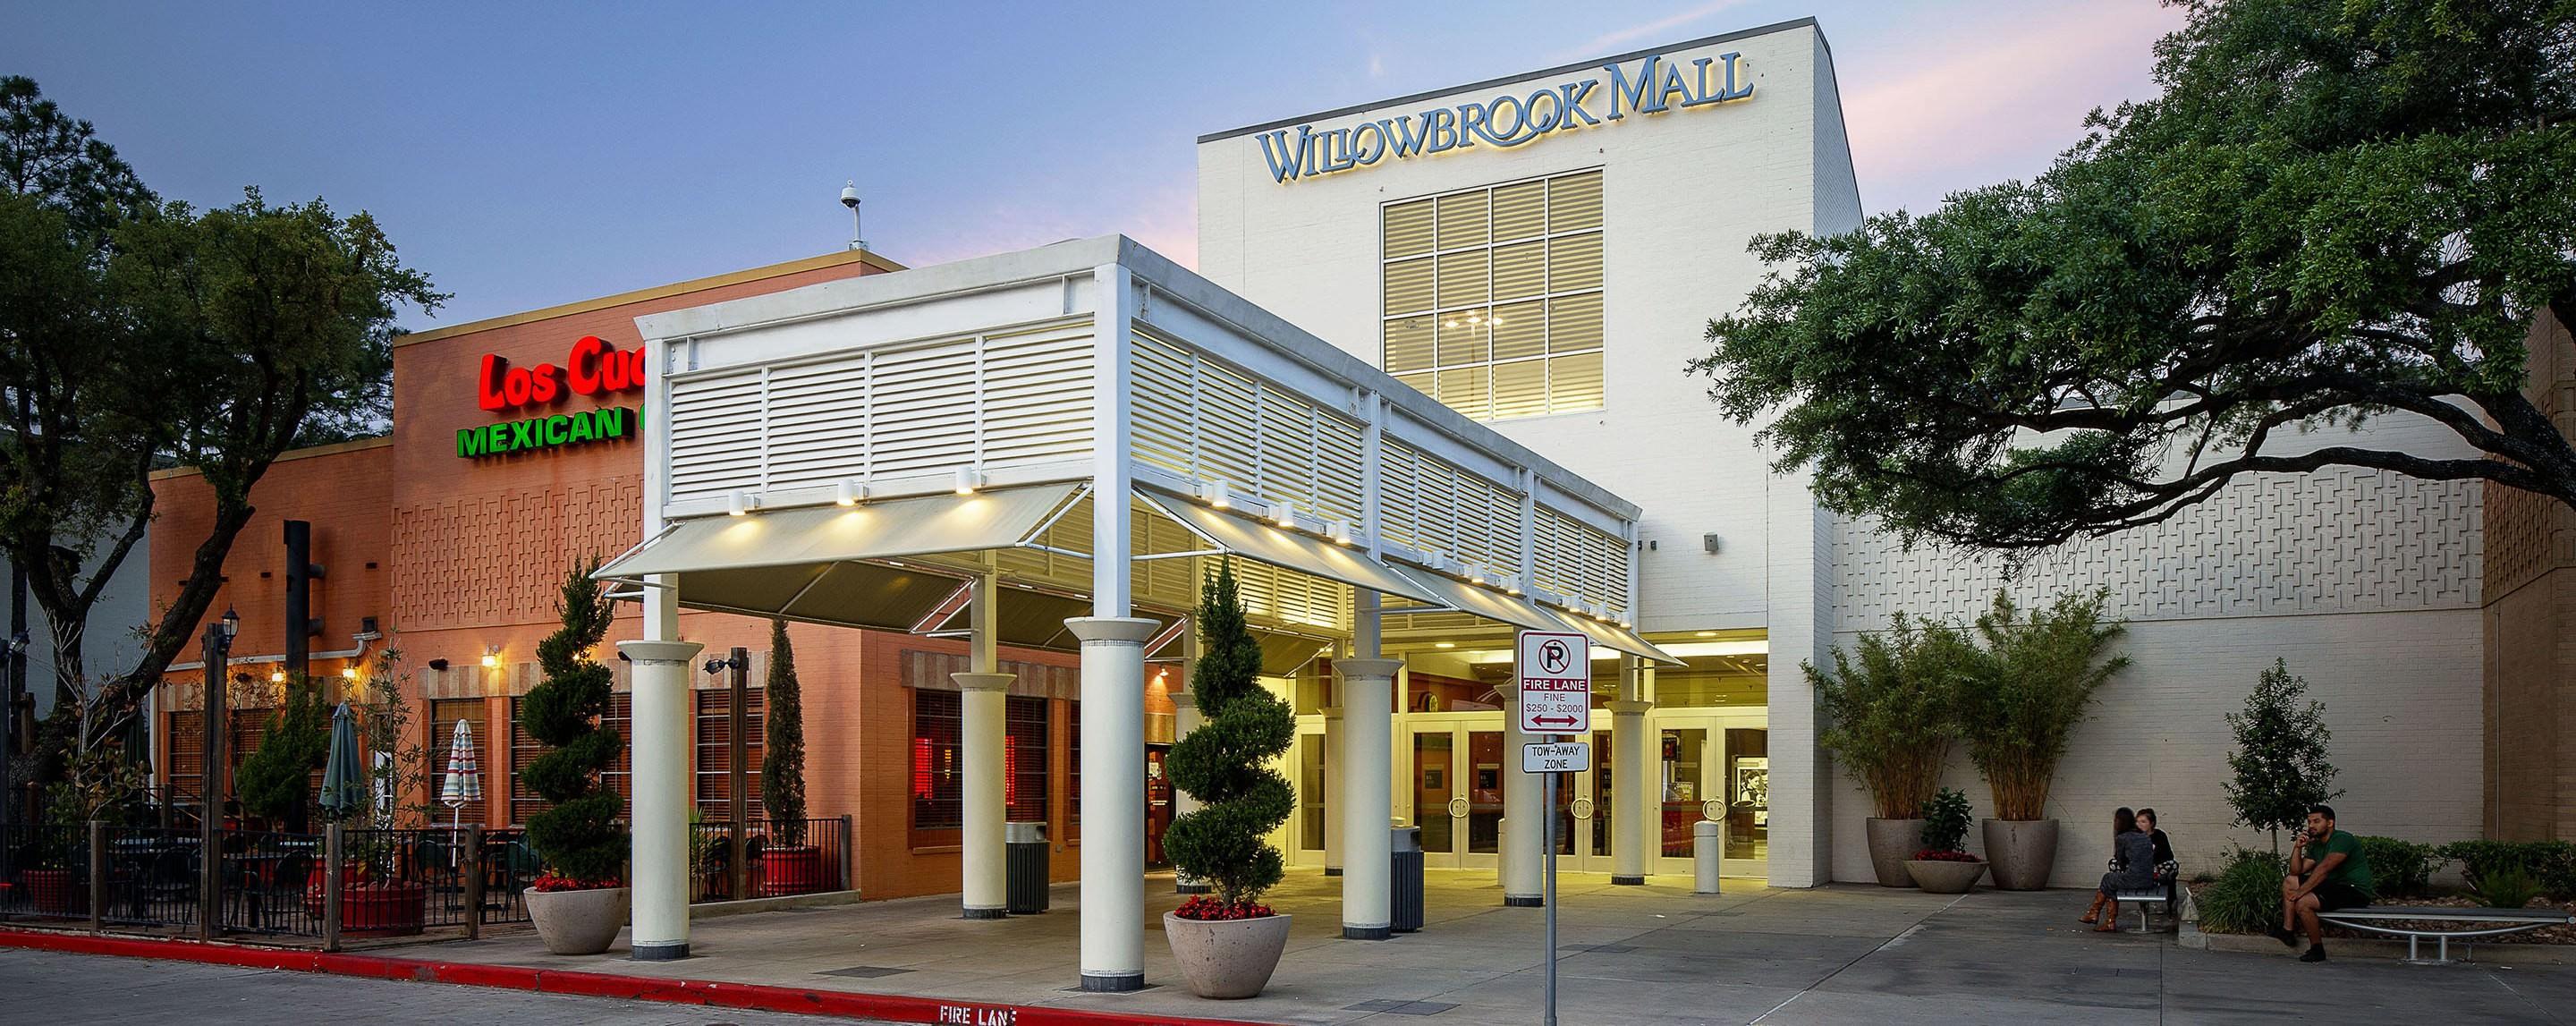 Willowbrook Mall Coupons near me in Houston 8coupons